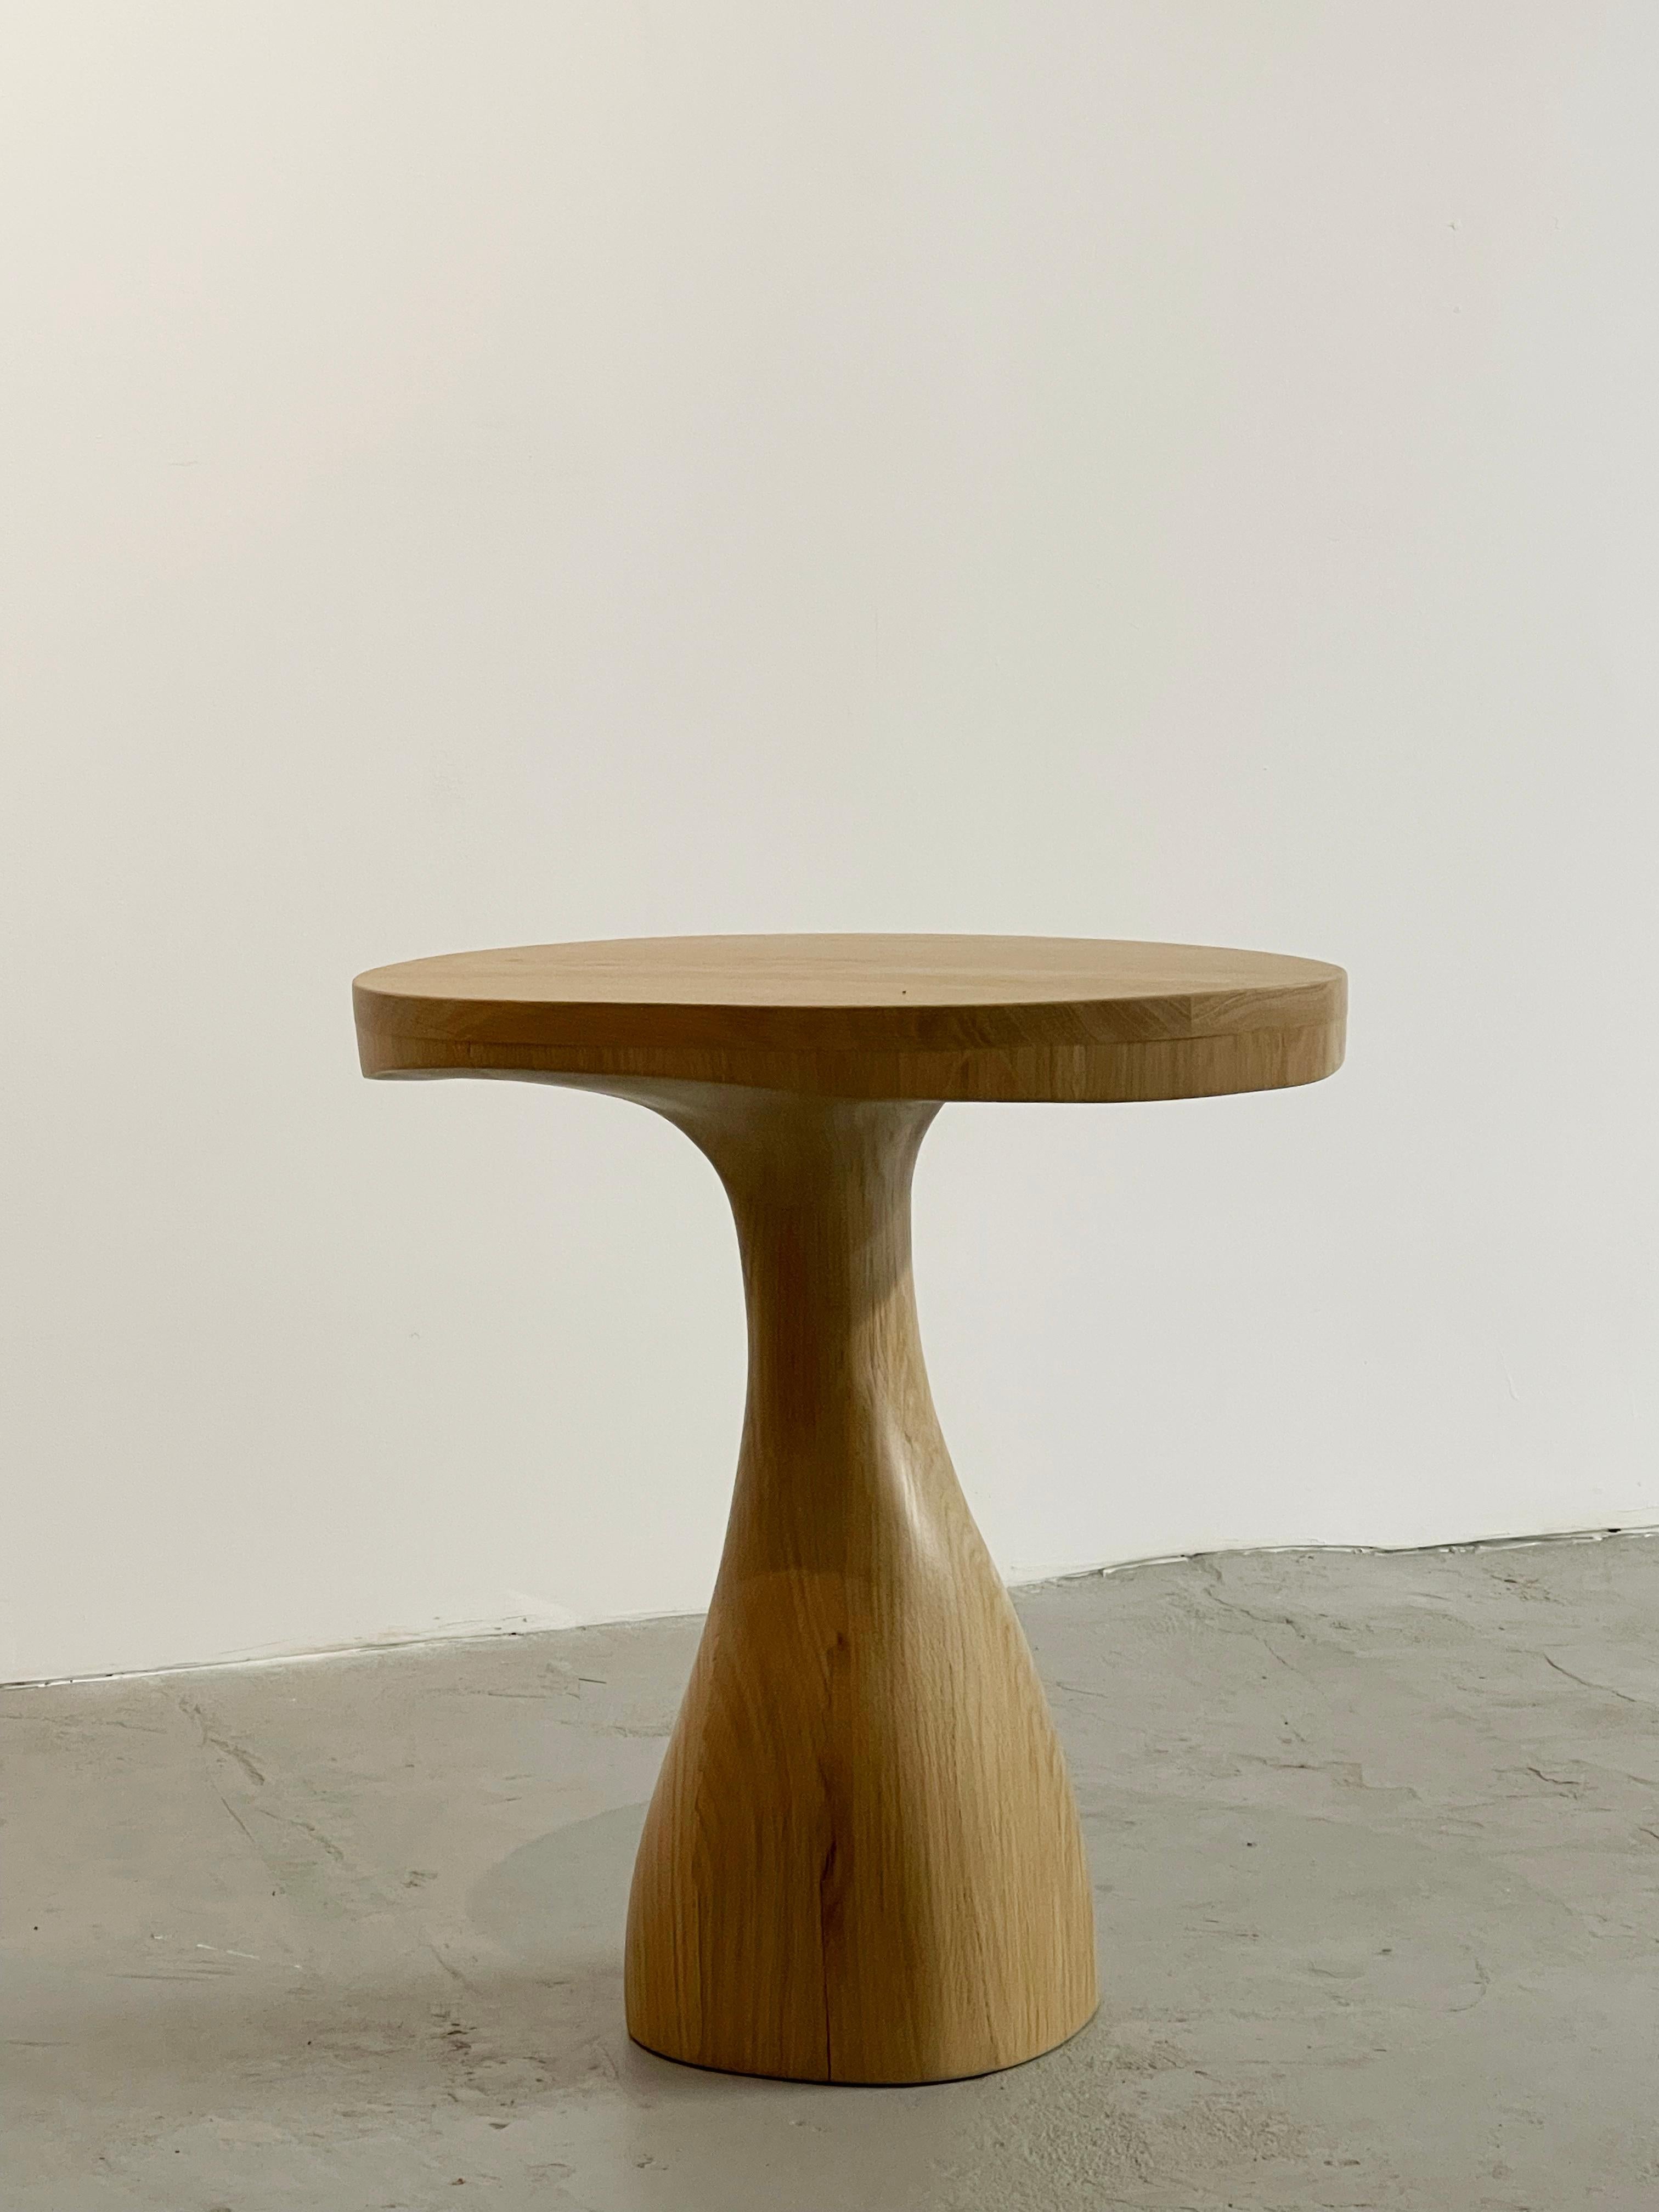 Jacques Jarrige bounces back from his iconic Leda floor lamp to create this timeless sculpted side table in solid natural oak. The organic shaped top prolongs the stem-like center leg.

The sculpture seems in movement as the eyes captures slowly all